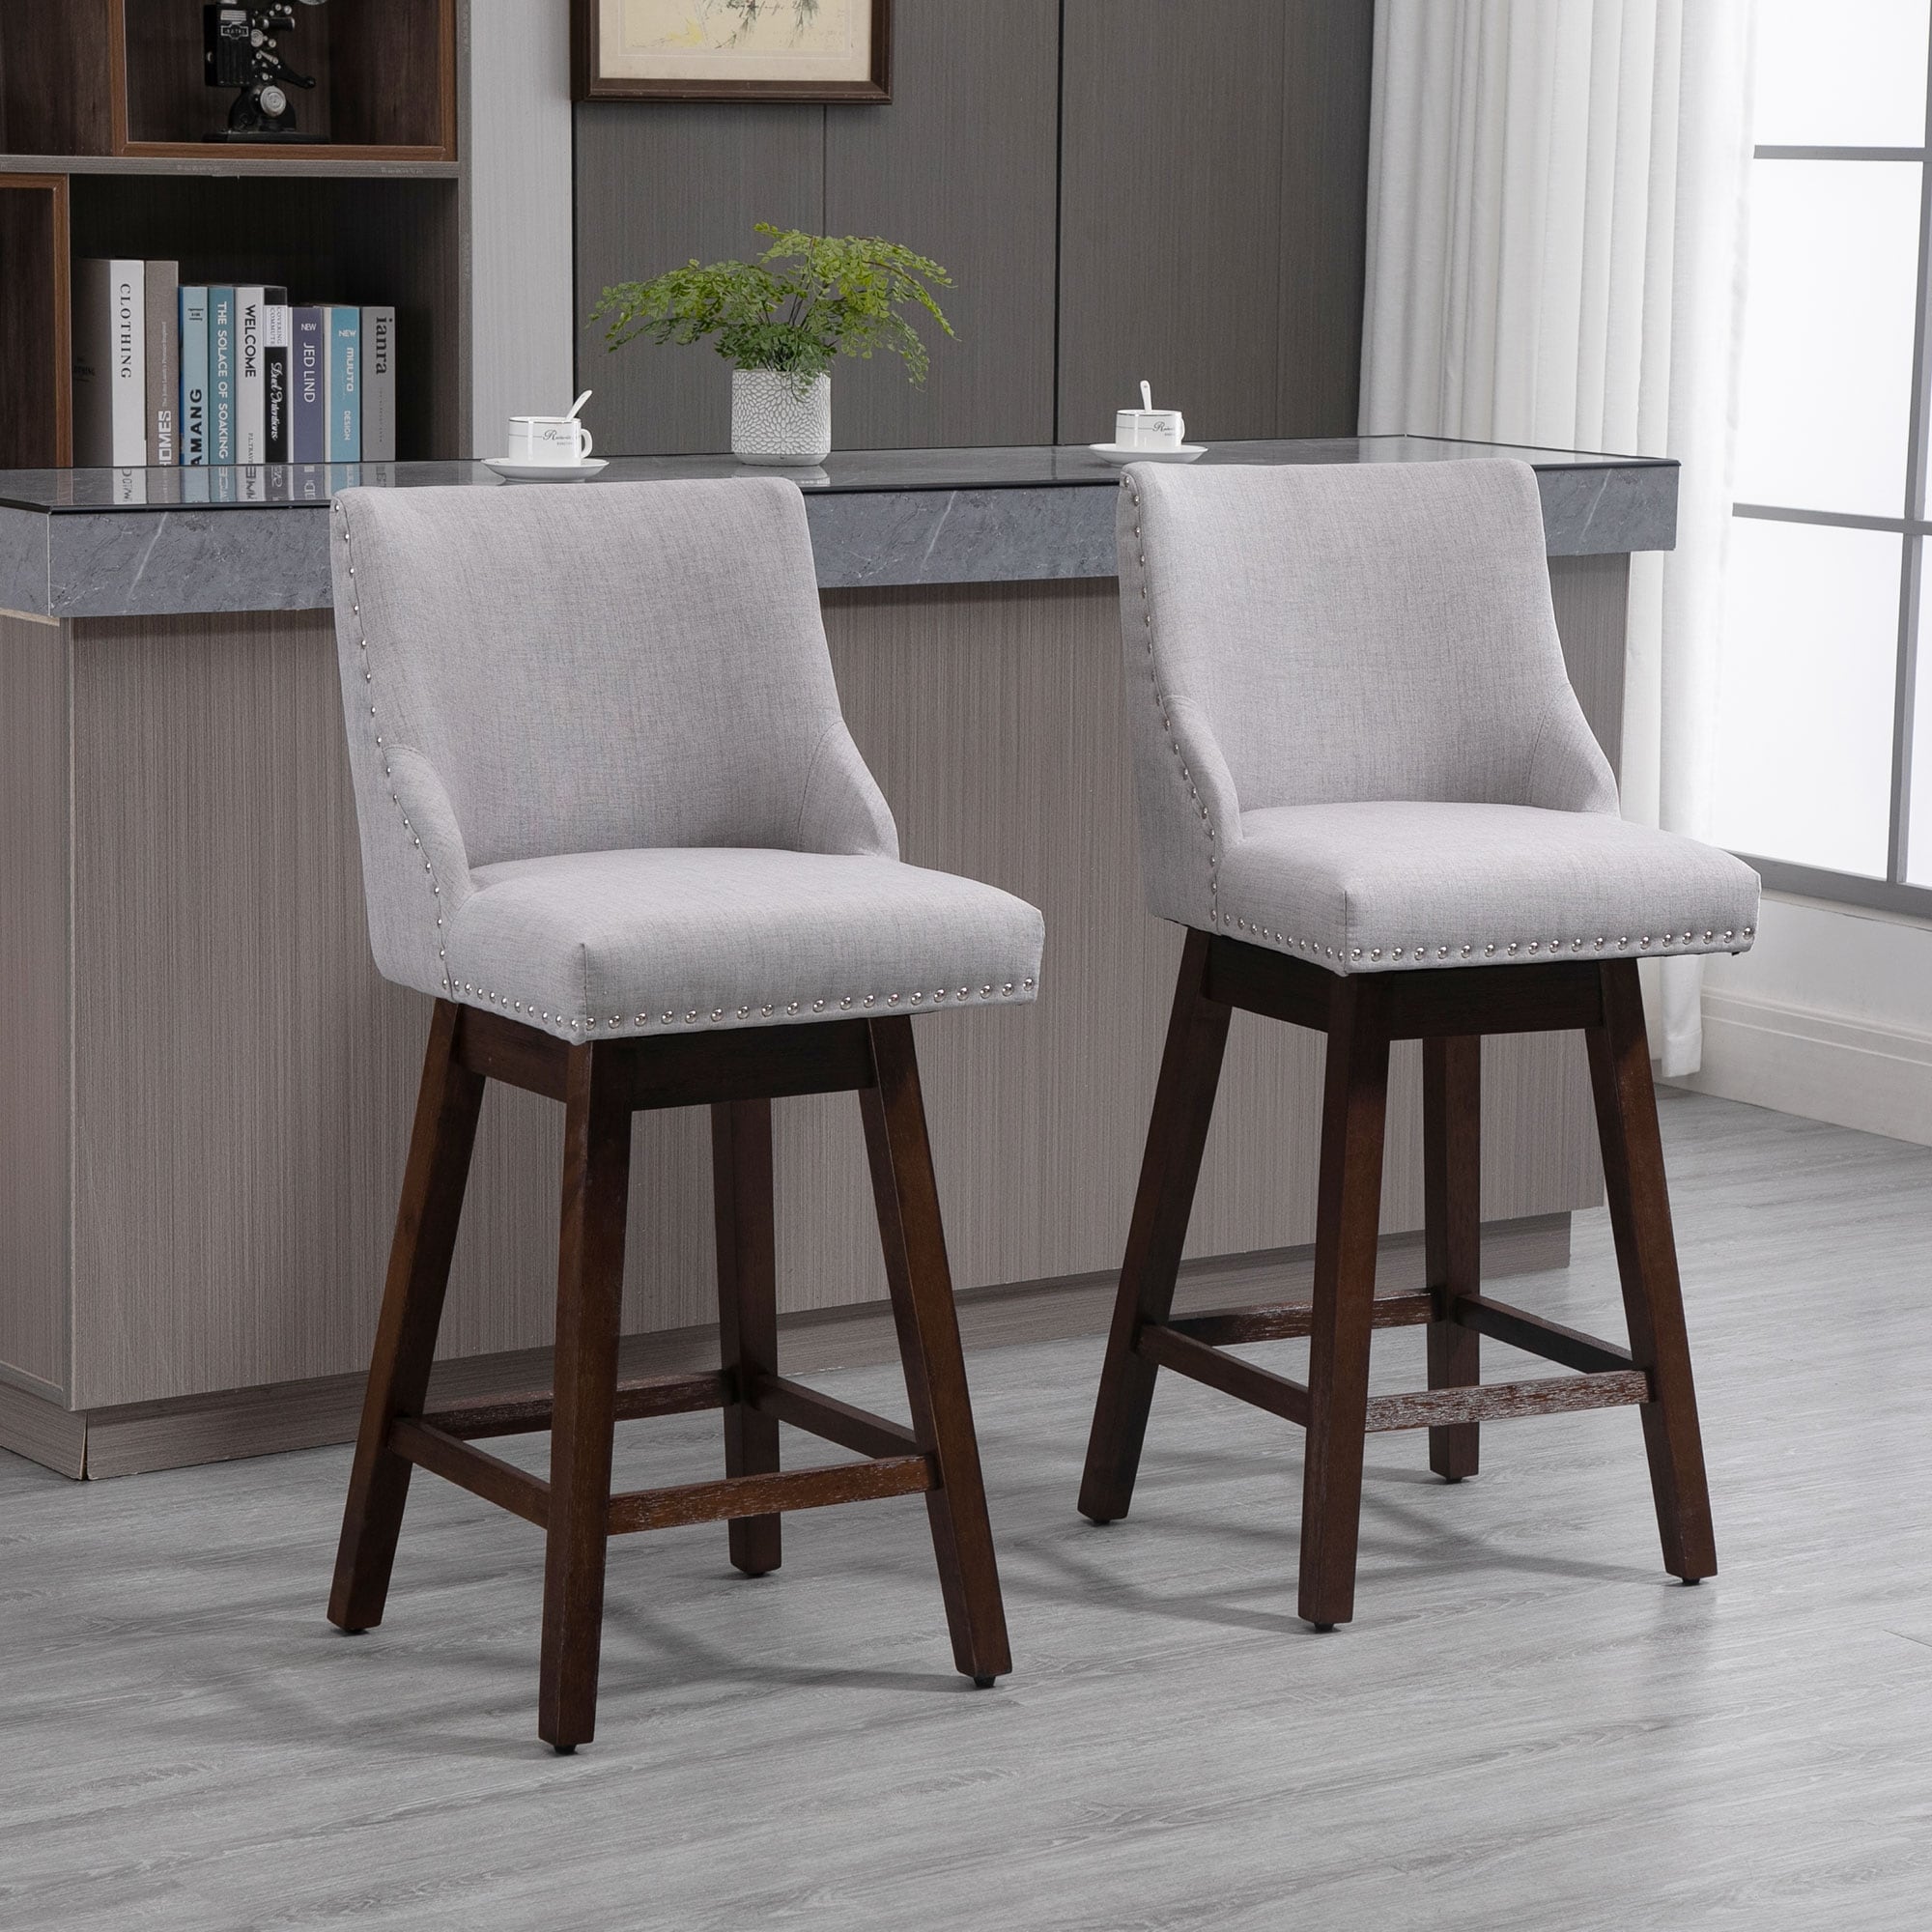 HOMCOM Bar Height Stools Set of 2 with Adjustable Seat, Thick Padded Cushion